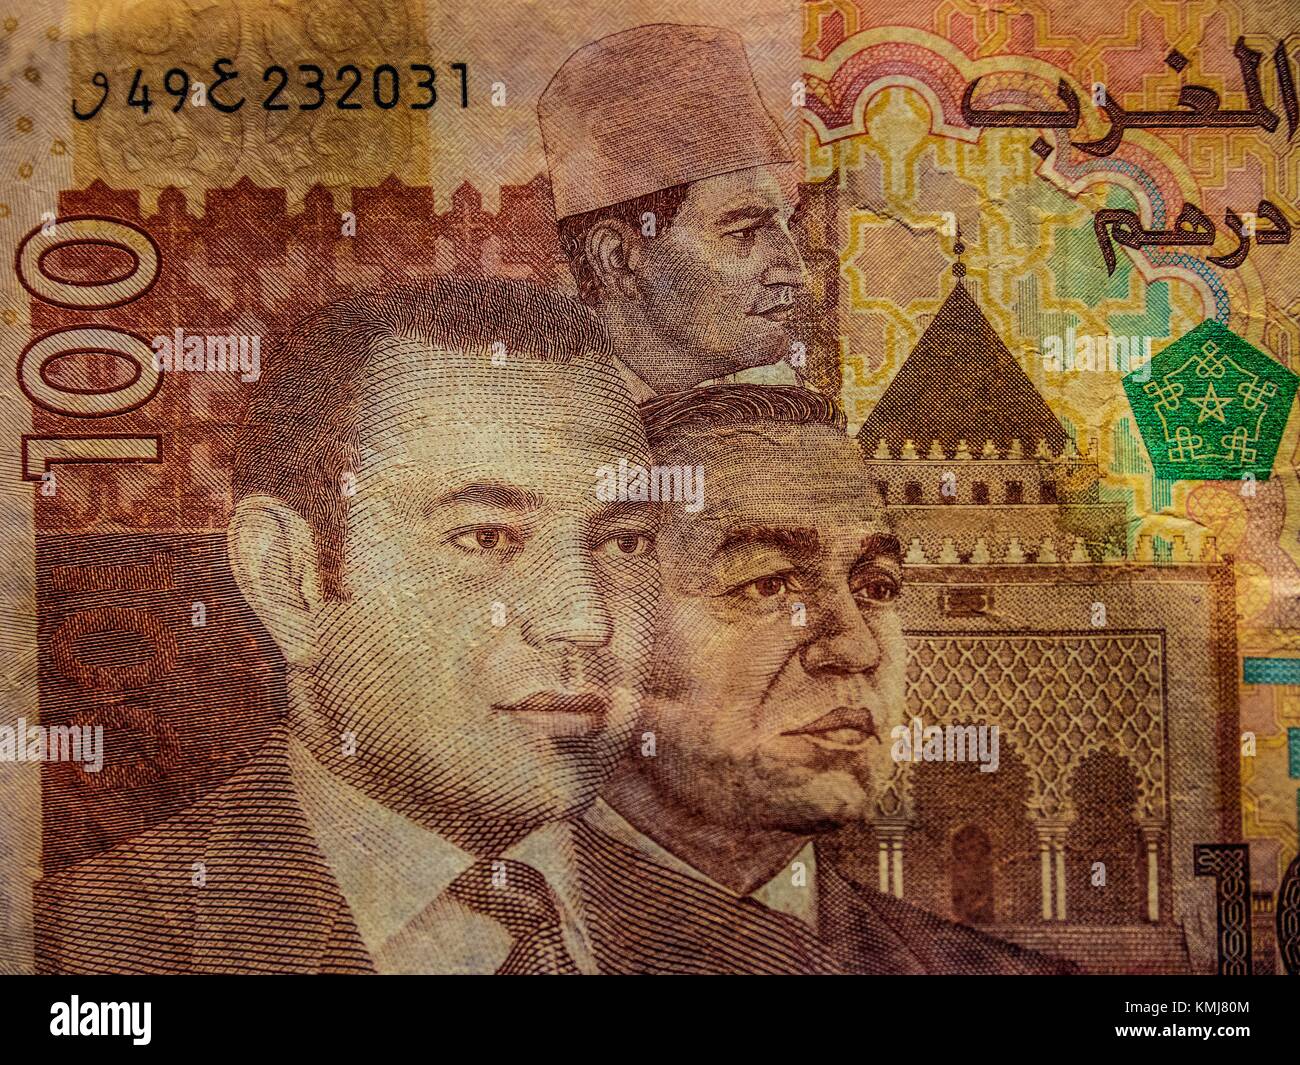 Moroccan banknote showing the 3 kings since independence of Morocco: Mohamed V, with a ''chech'', his son Hassan II, and his son again, Mohamed VI. Stock Photo